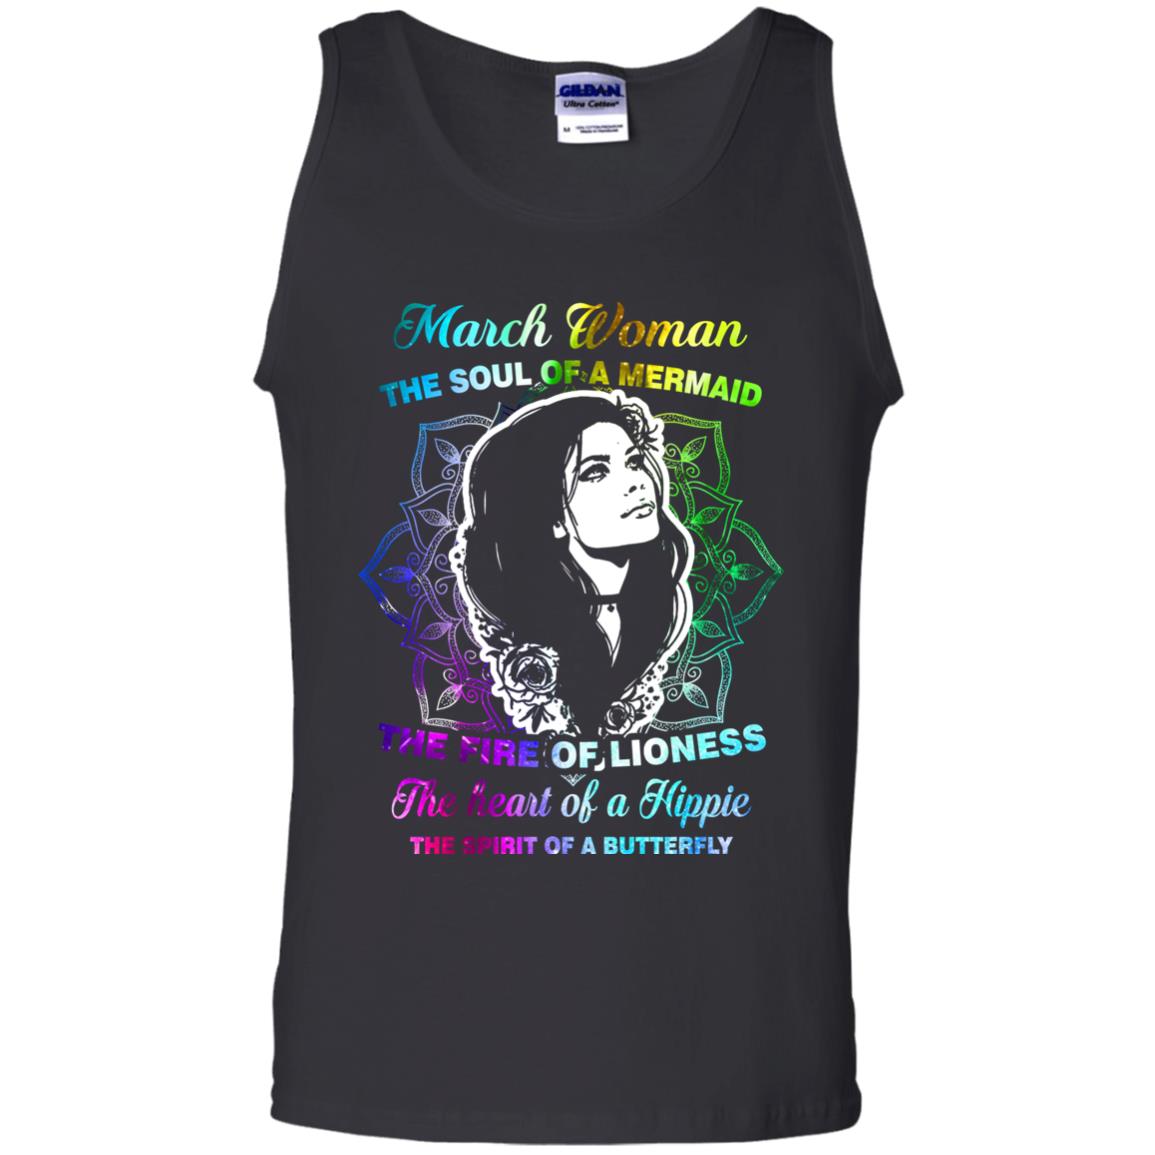 March Woman Shirt The Soul Of A Mermaid The Fire Of Lioness The Heart Of A Hippeie The Spirit Of A ButterflyG220 Gildan 100% Cotton Tank Top